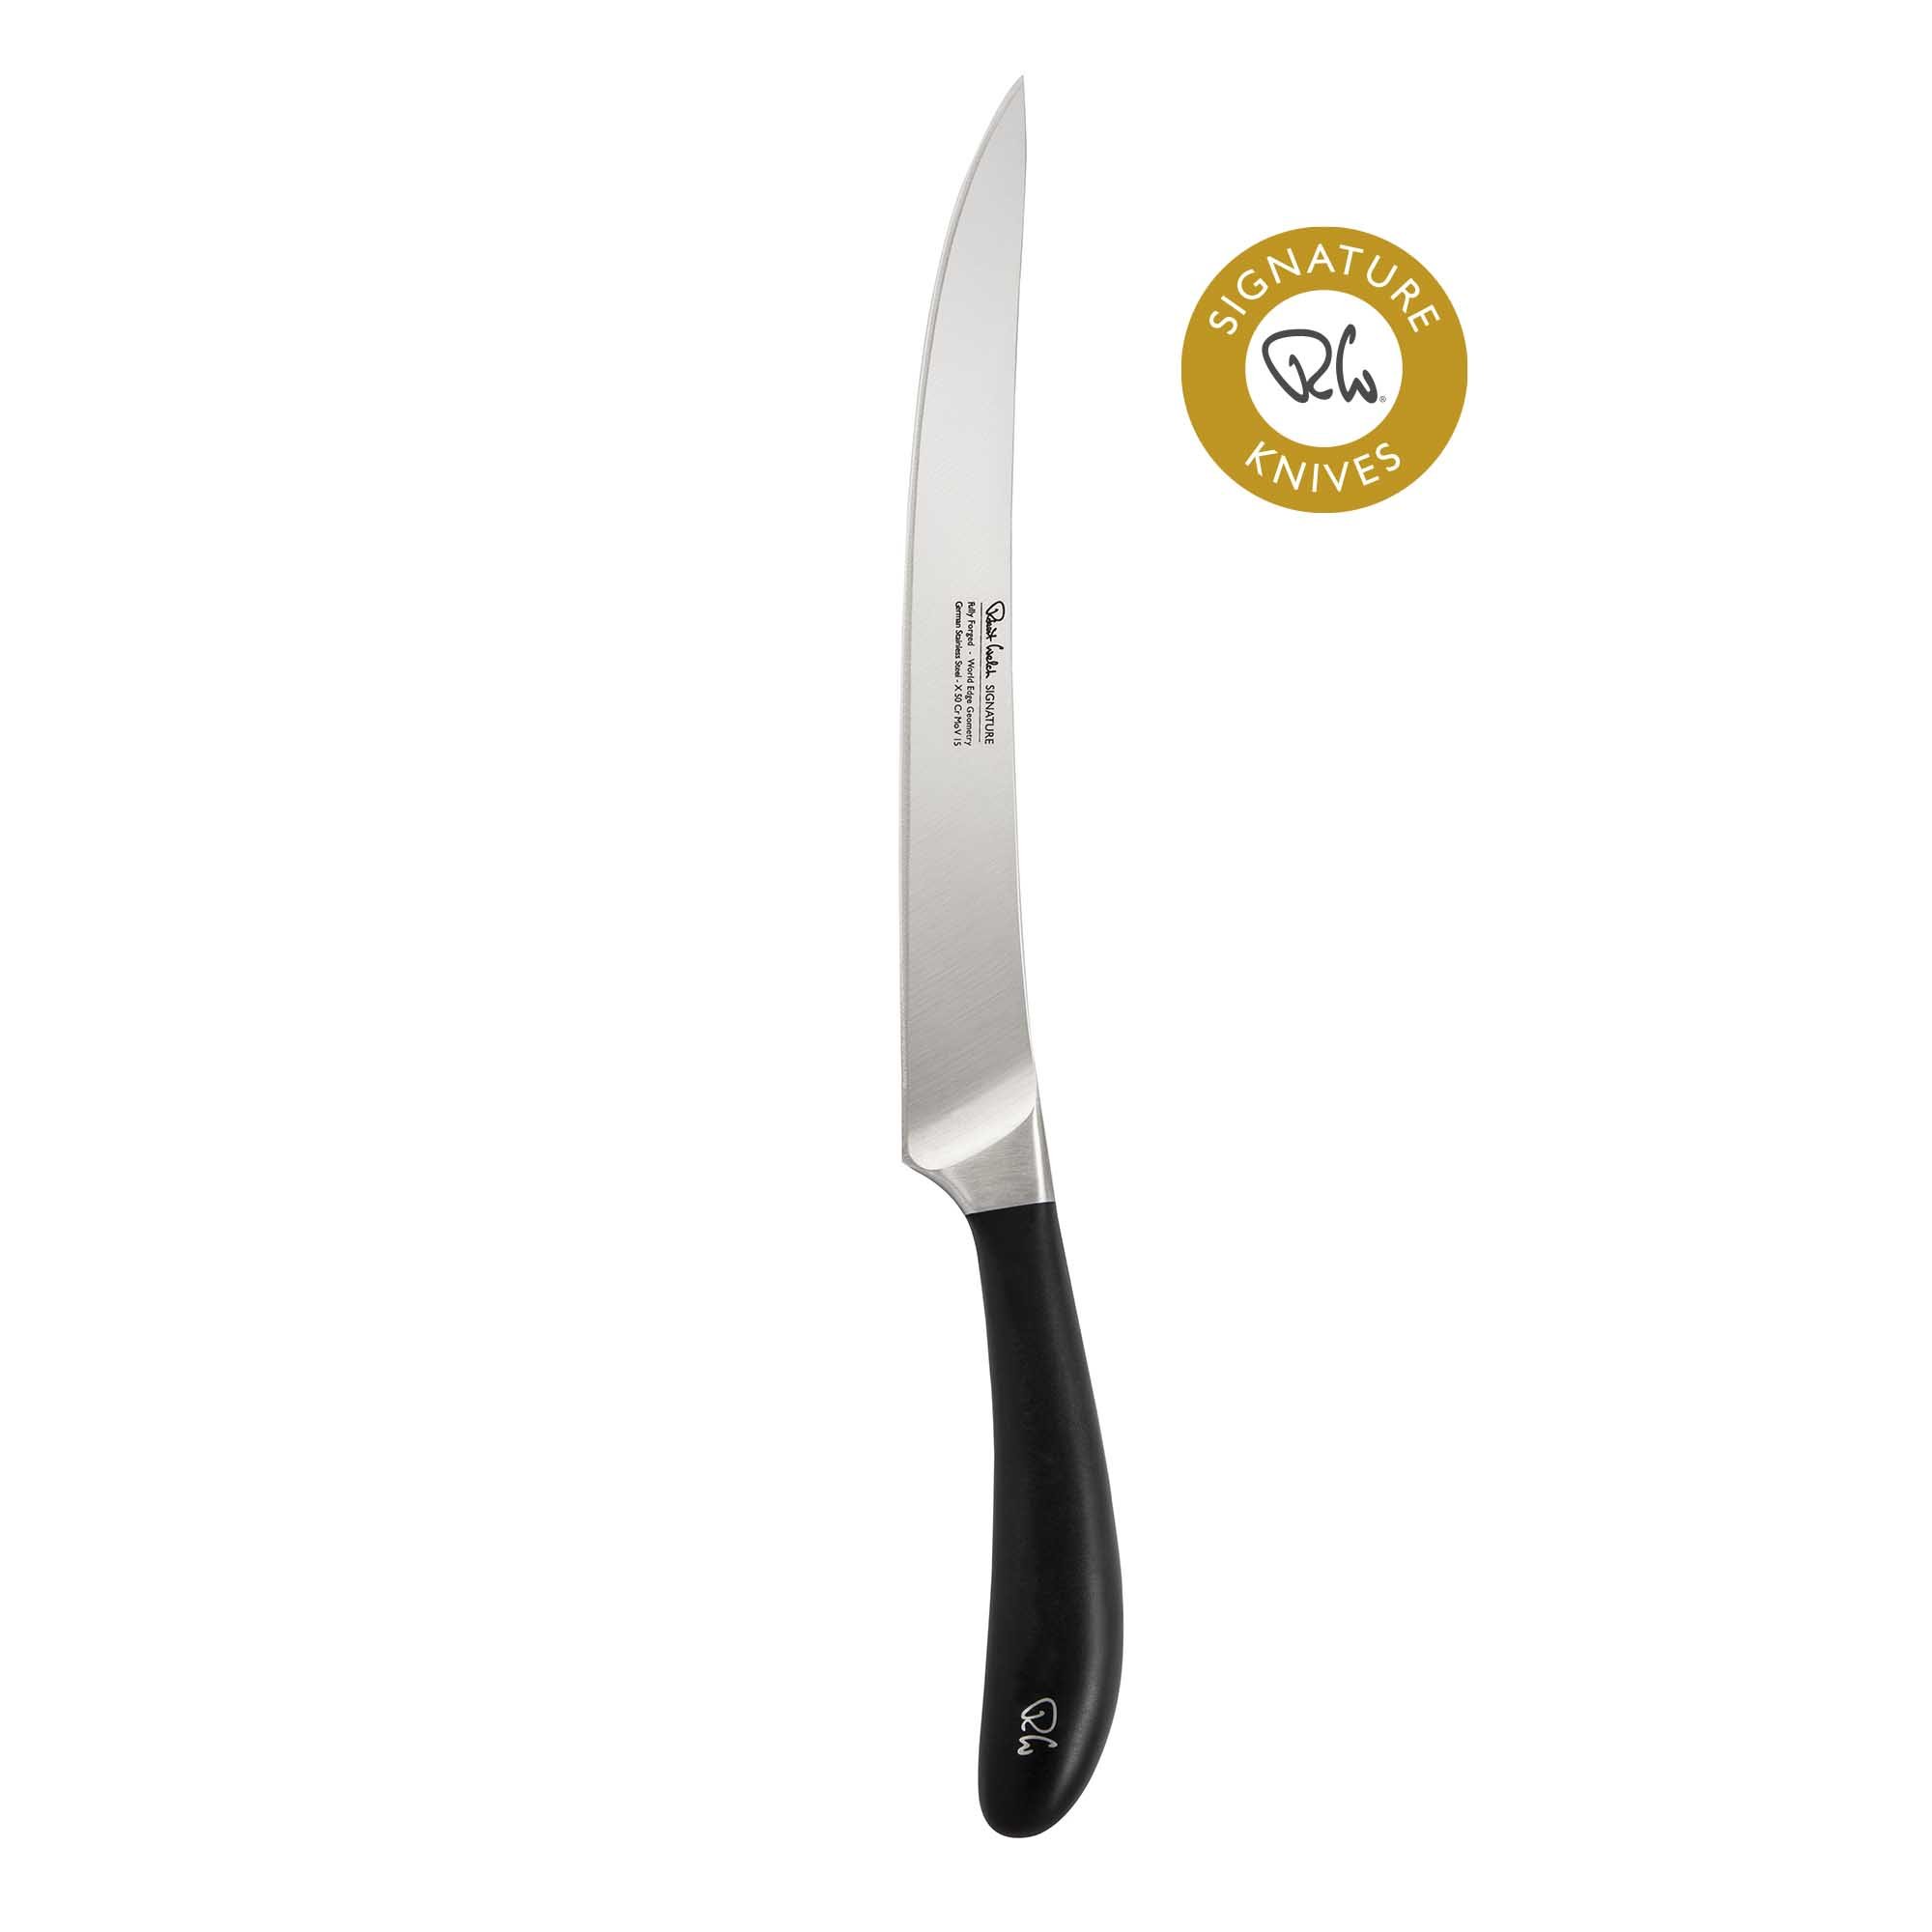 Robert Welch SIGNATURE CARVING KNIFE 23CM